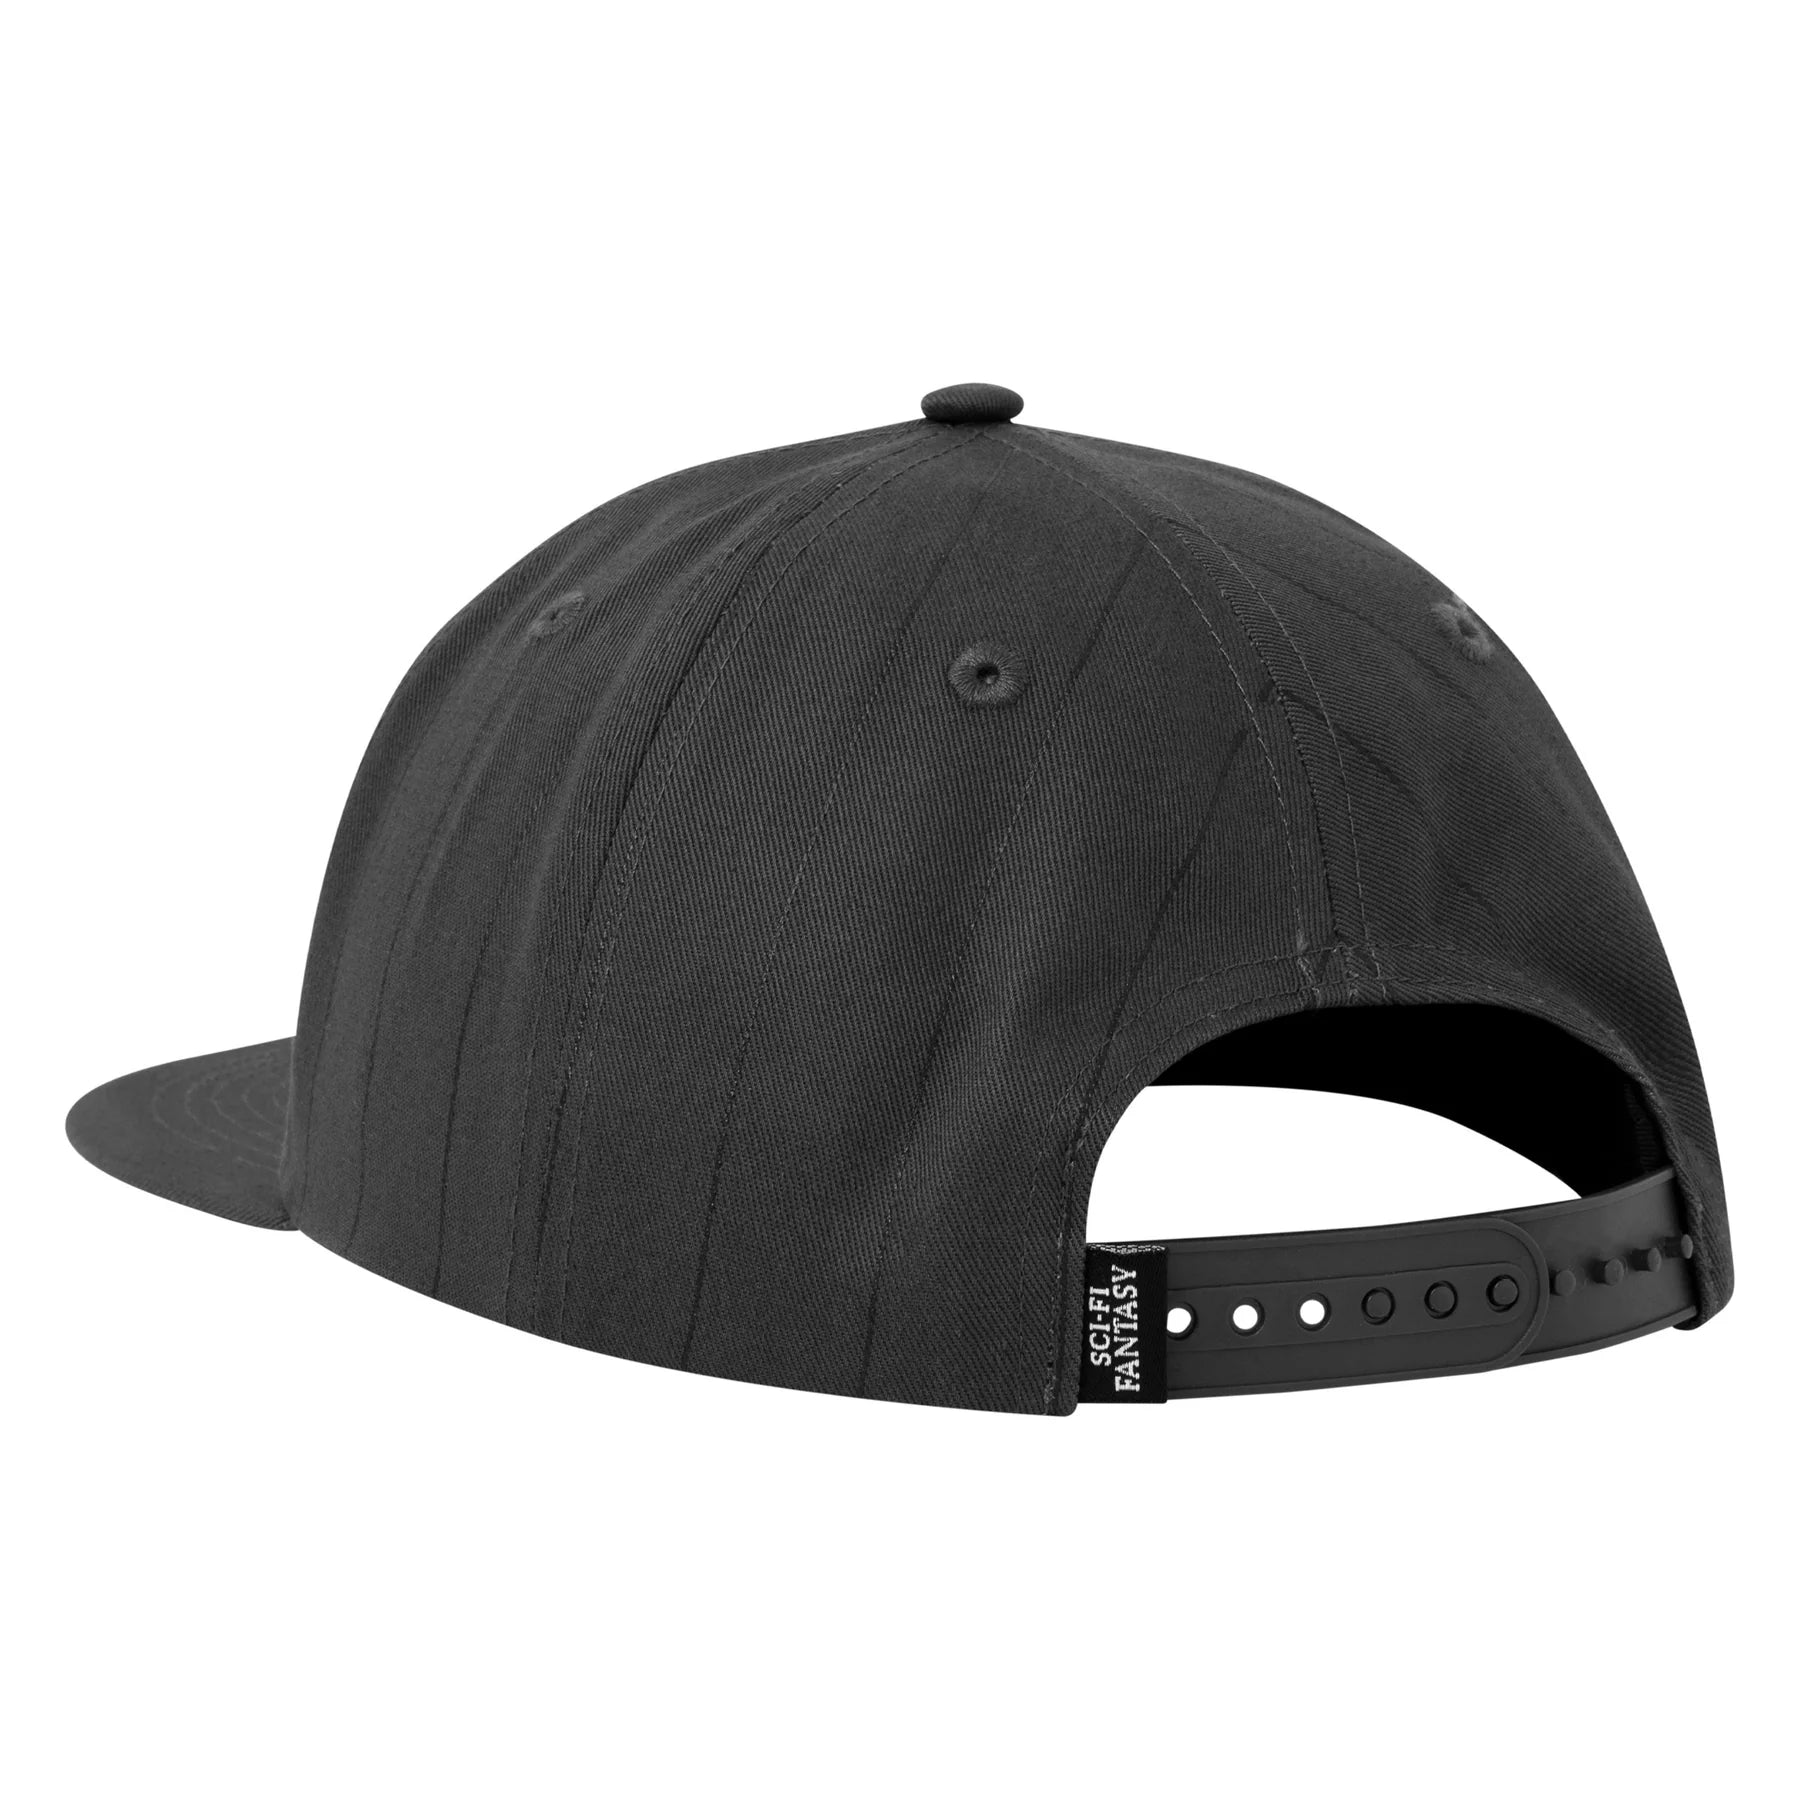 Dark grey sci fi fantasy six panel cap with black logo on front. Free uk shipping on orders over £50